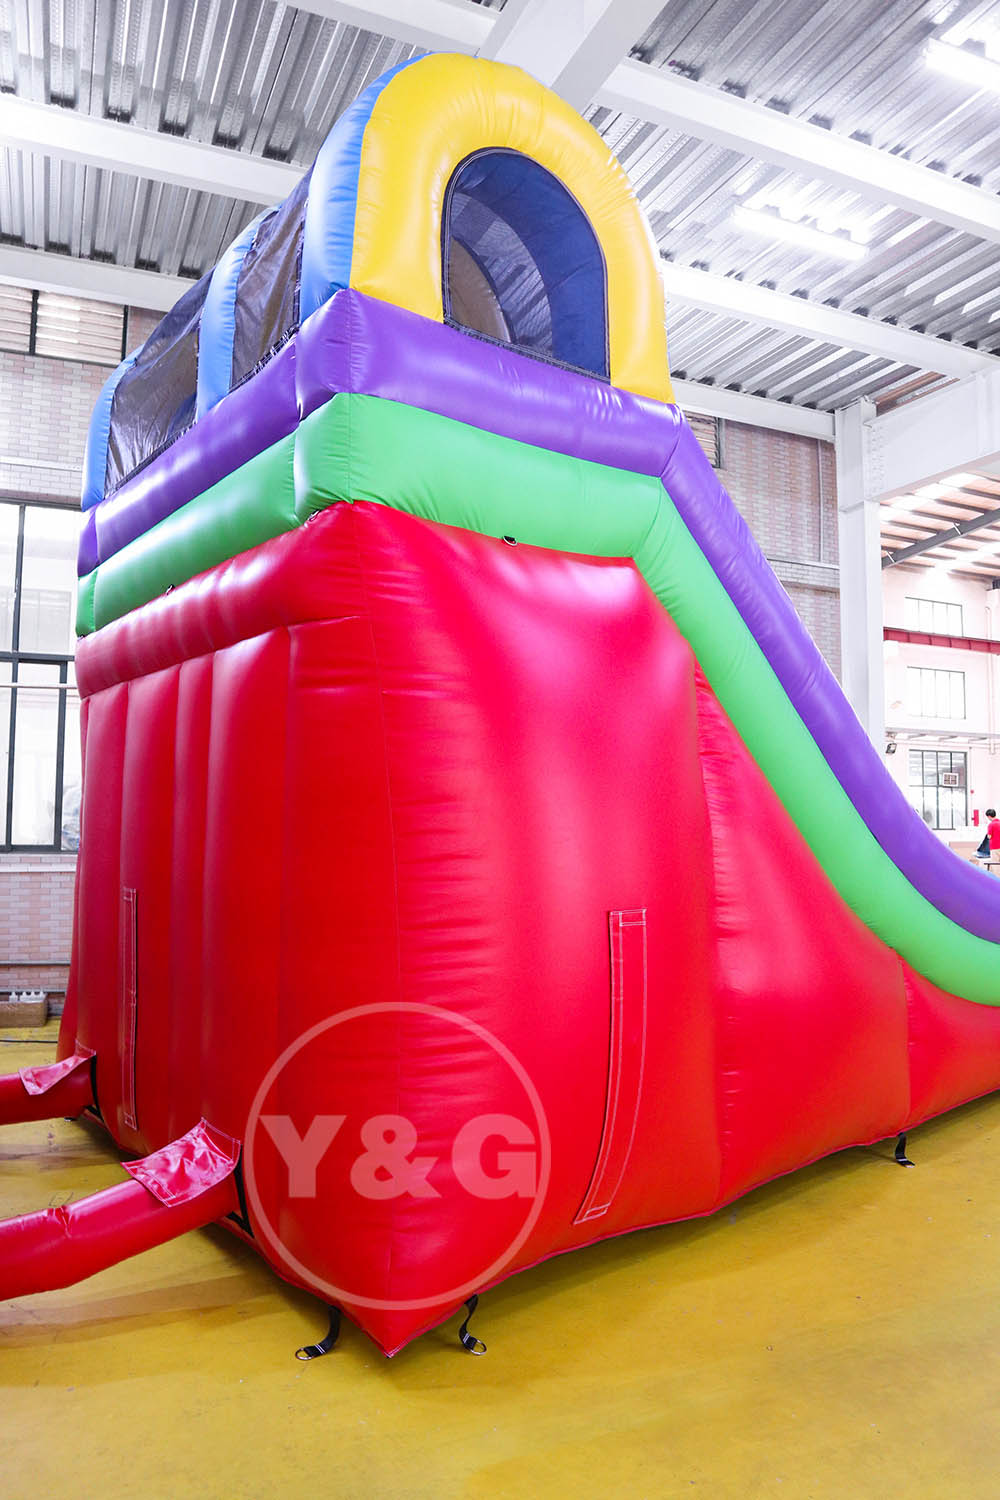 Outdoor inflatable large water slideYG-107